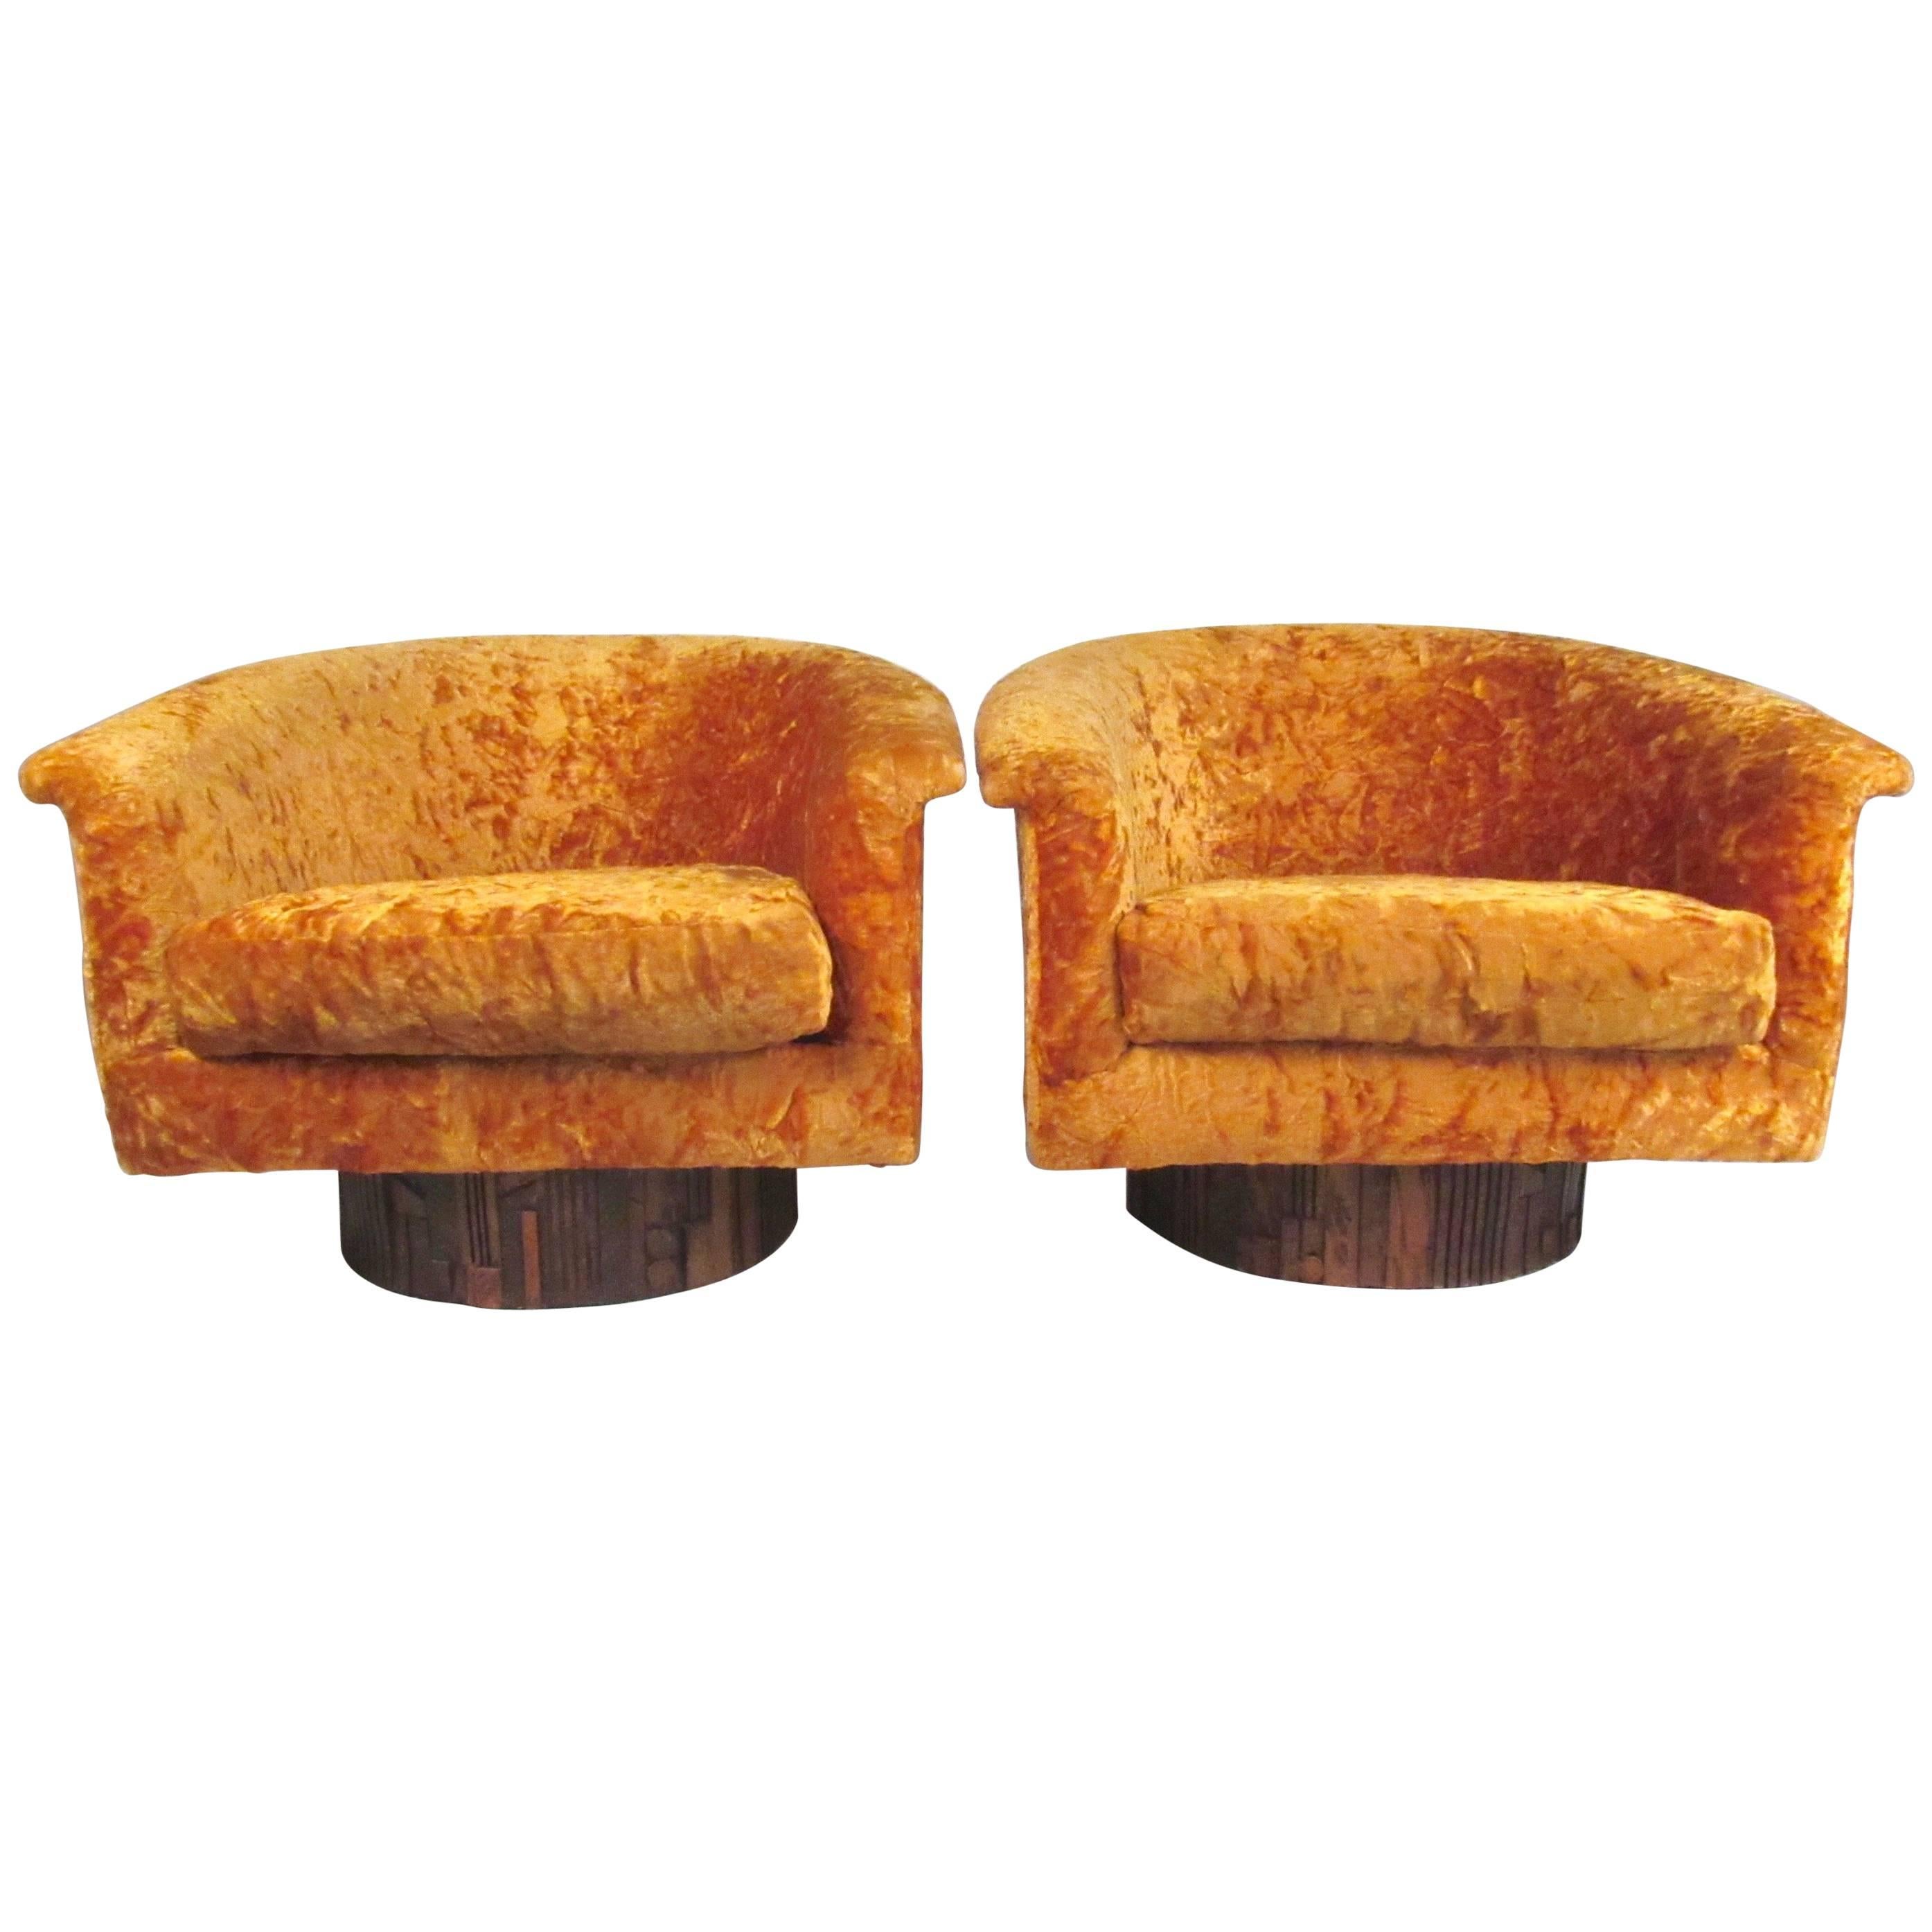 Pair of Swivel Club Chairs by Adrian Pearsall for Craft Associates